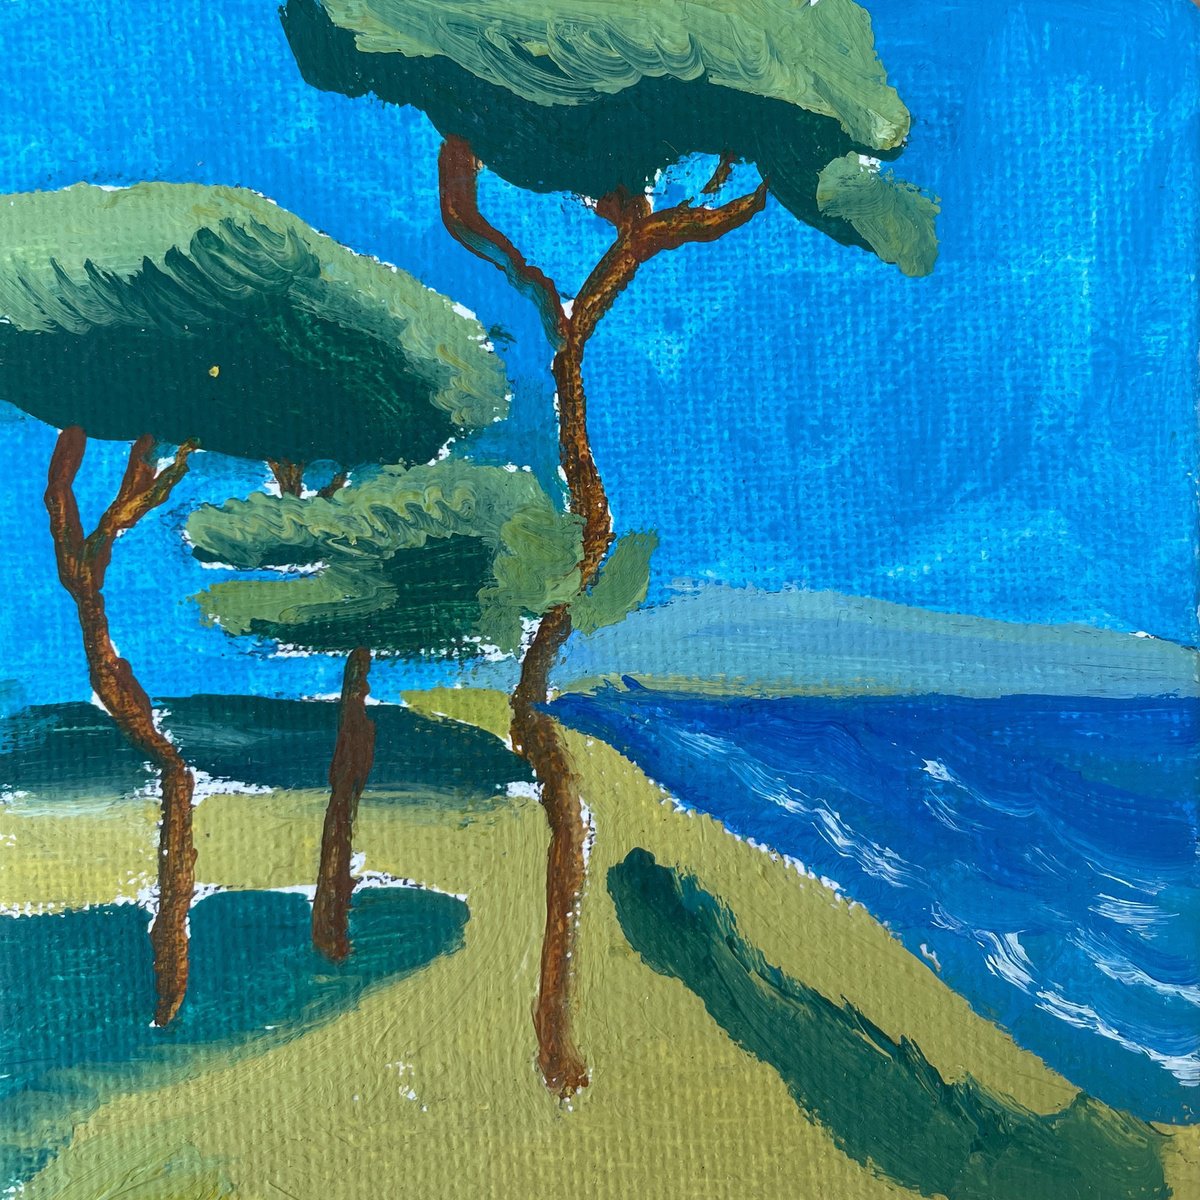 Pines on the Coast - 10x10 cm by Victoria Dael